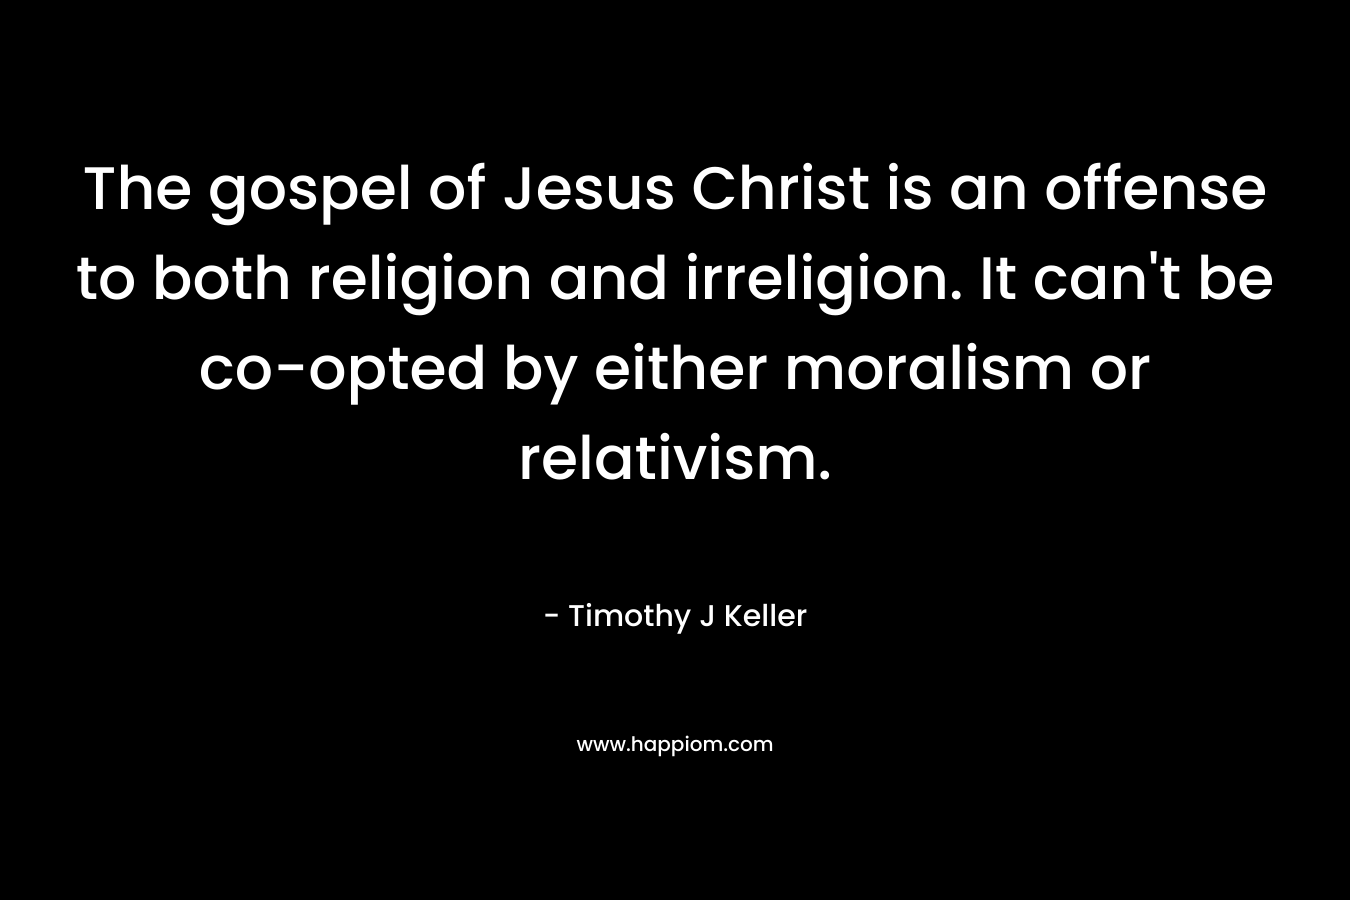 The gospel of Jesus Christ is an offense to both religion and irreligion. It can't be co-opted by either moralism or relativism.